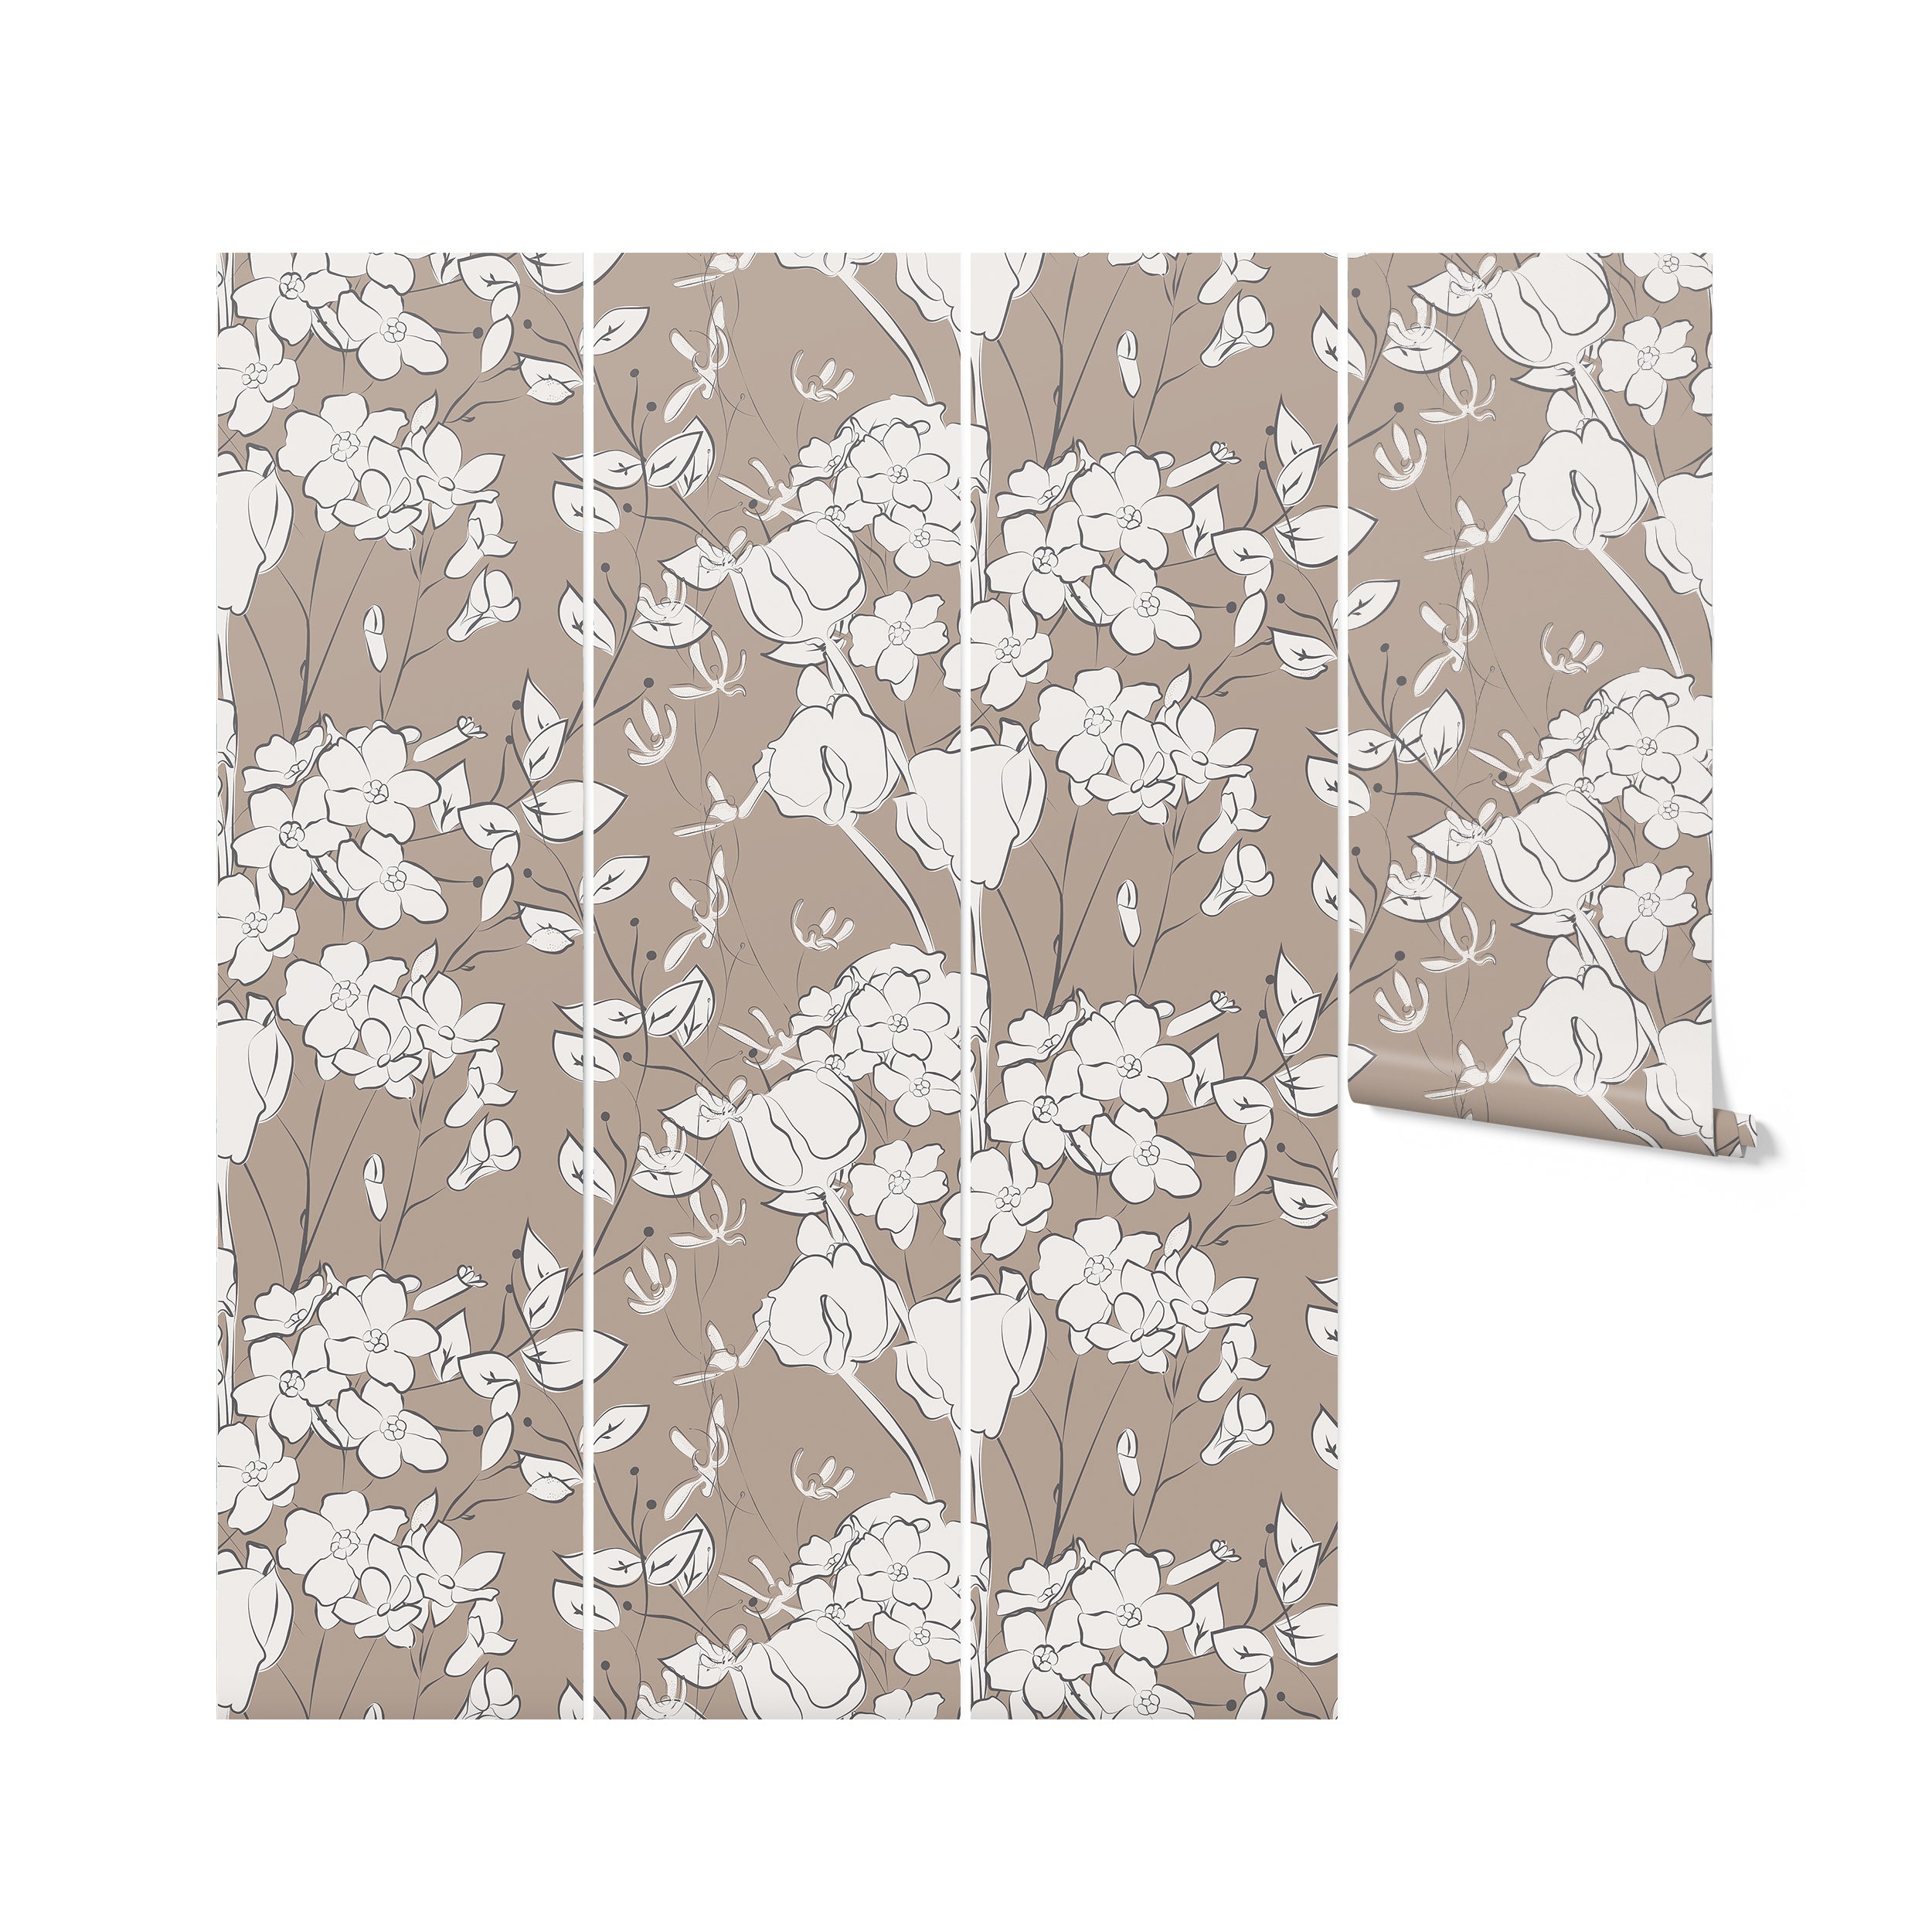 Three panels and a rolled corner of "Floral Line Art Wallpaper" depicted against a neutral background. The panels display the continuity of the floral pattern, with its line-drawn flowers and leaves in white over a taupe background, illustrating how the wallpaper can envelop a room with its graceful design.